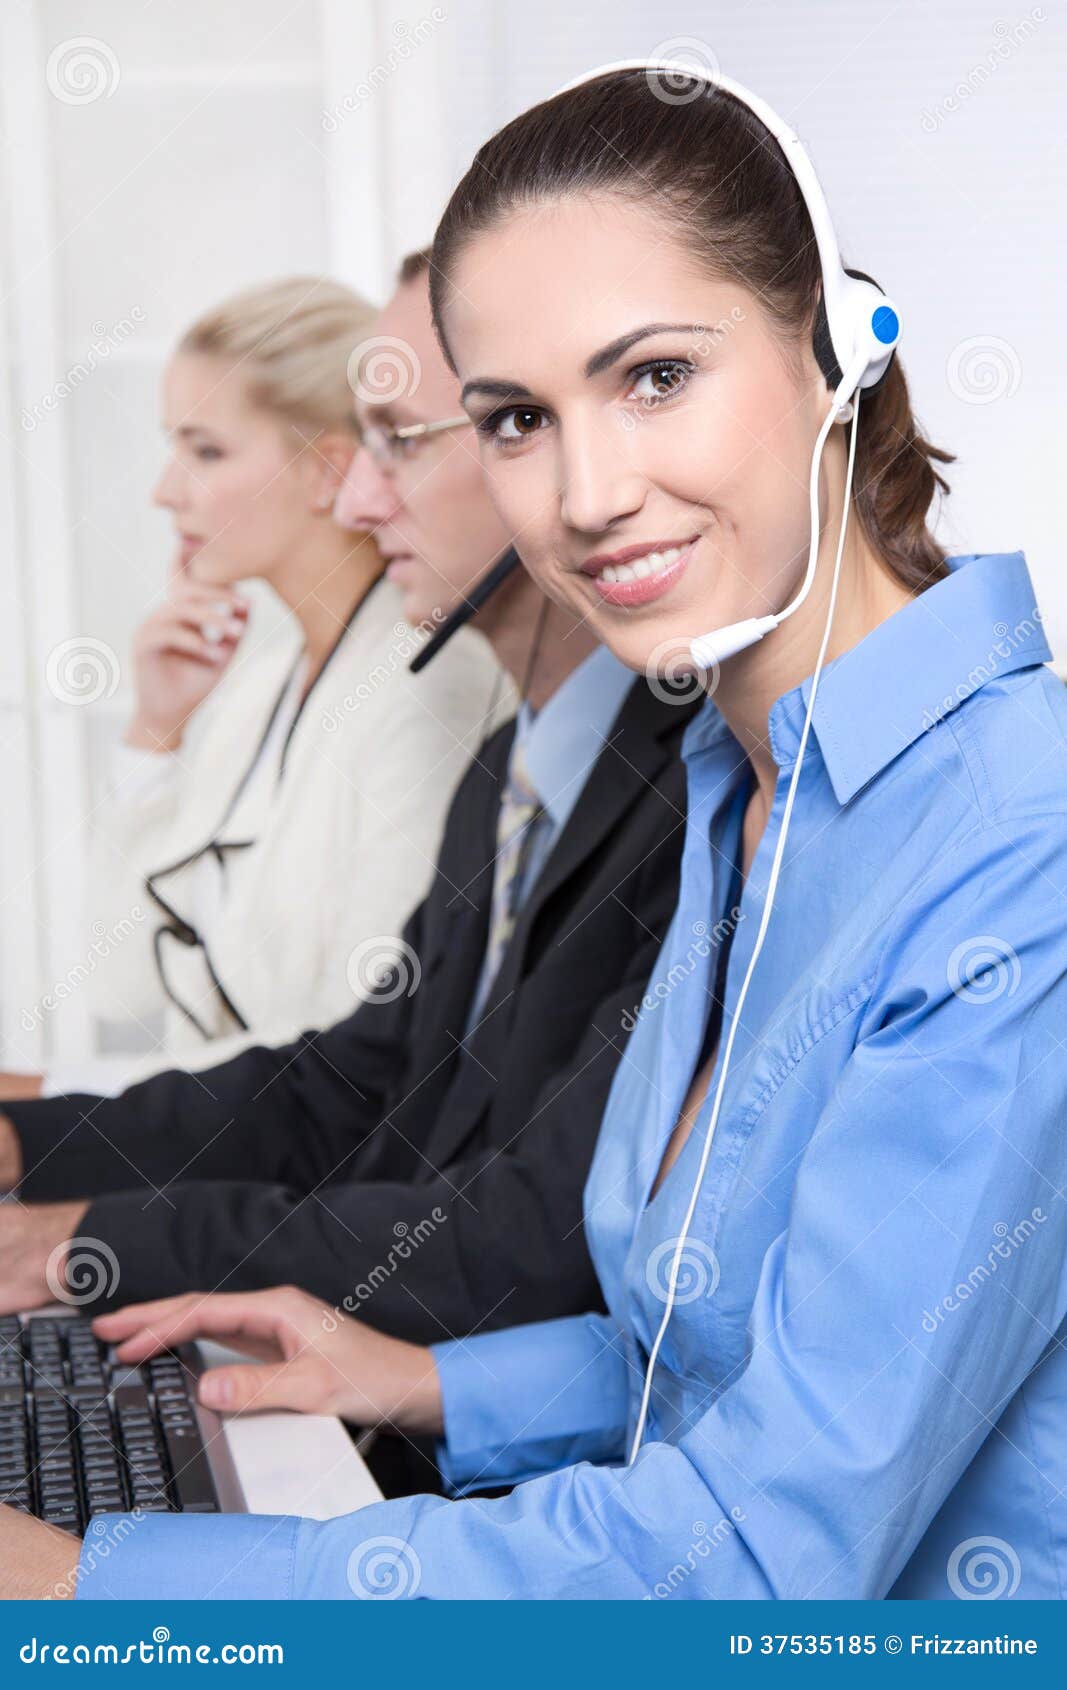 telesales or helpdesk team - helpful woman with headset smiling